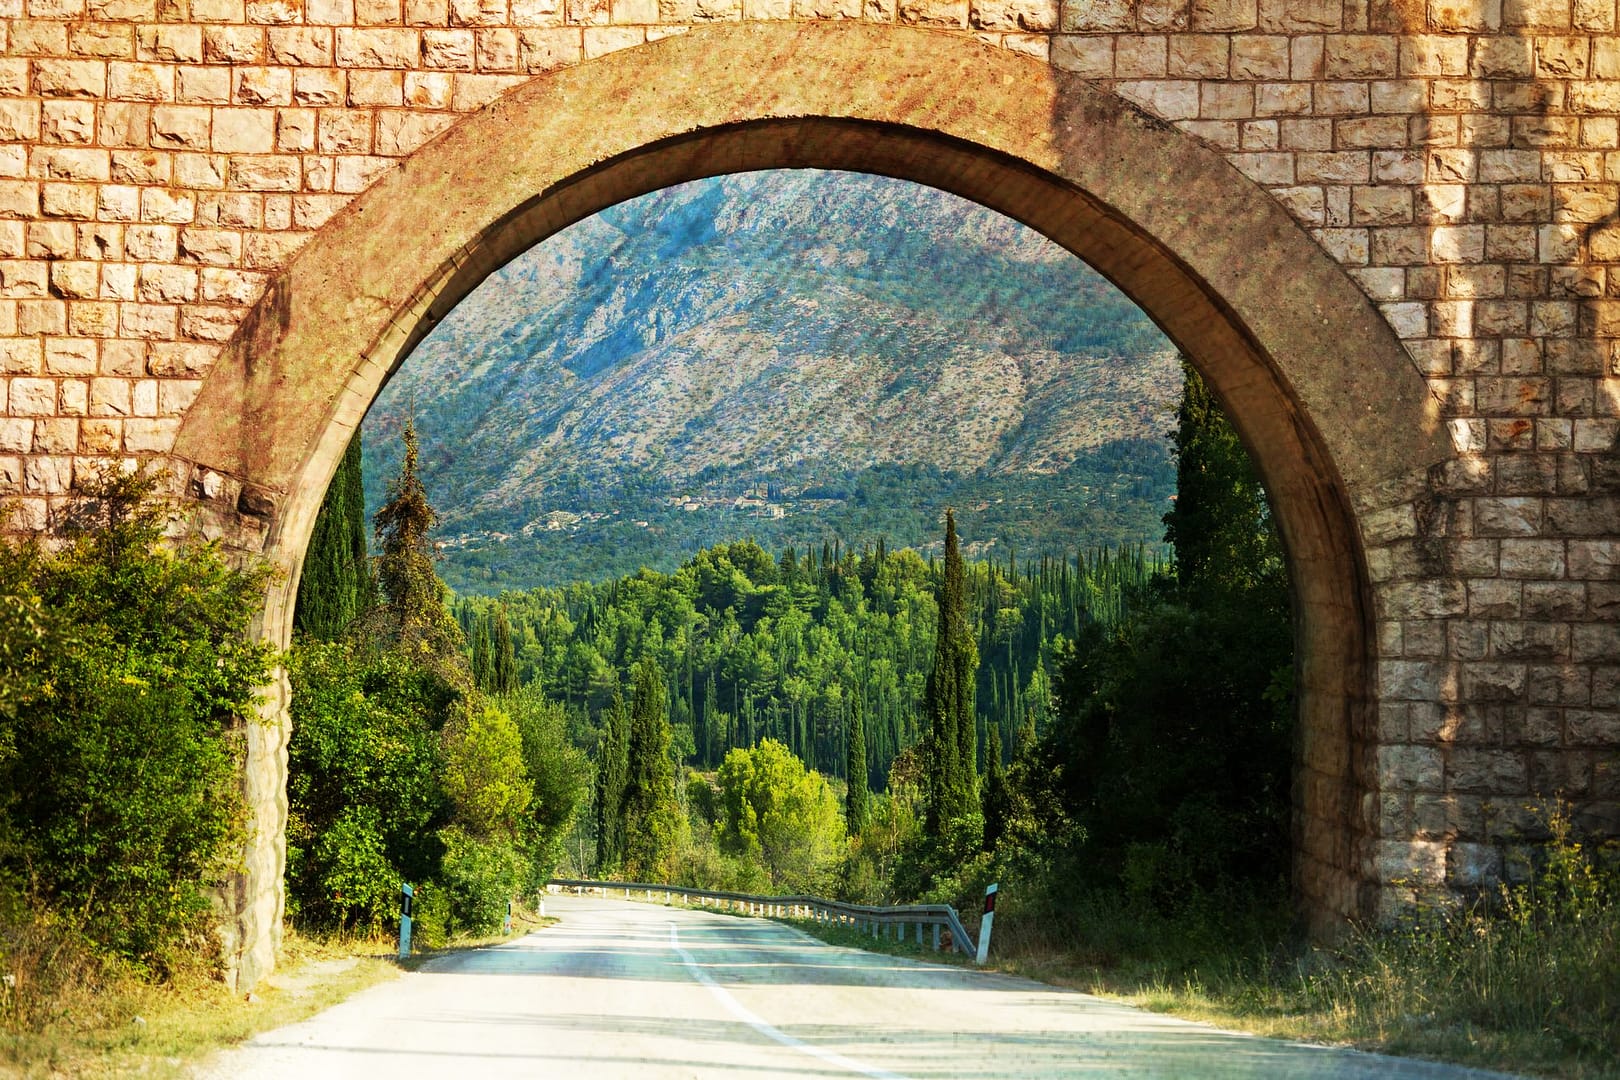 A stone arch over a road leading to a mountain.